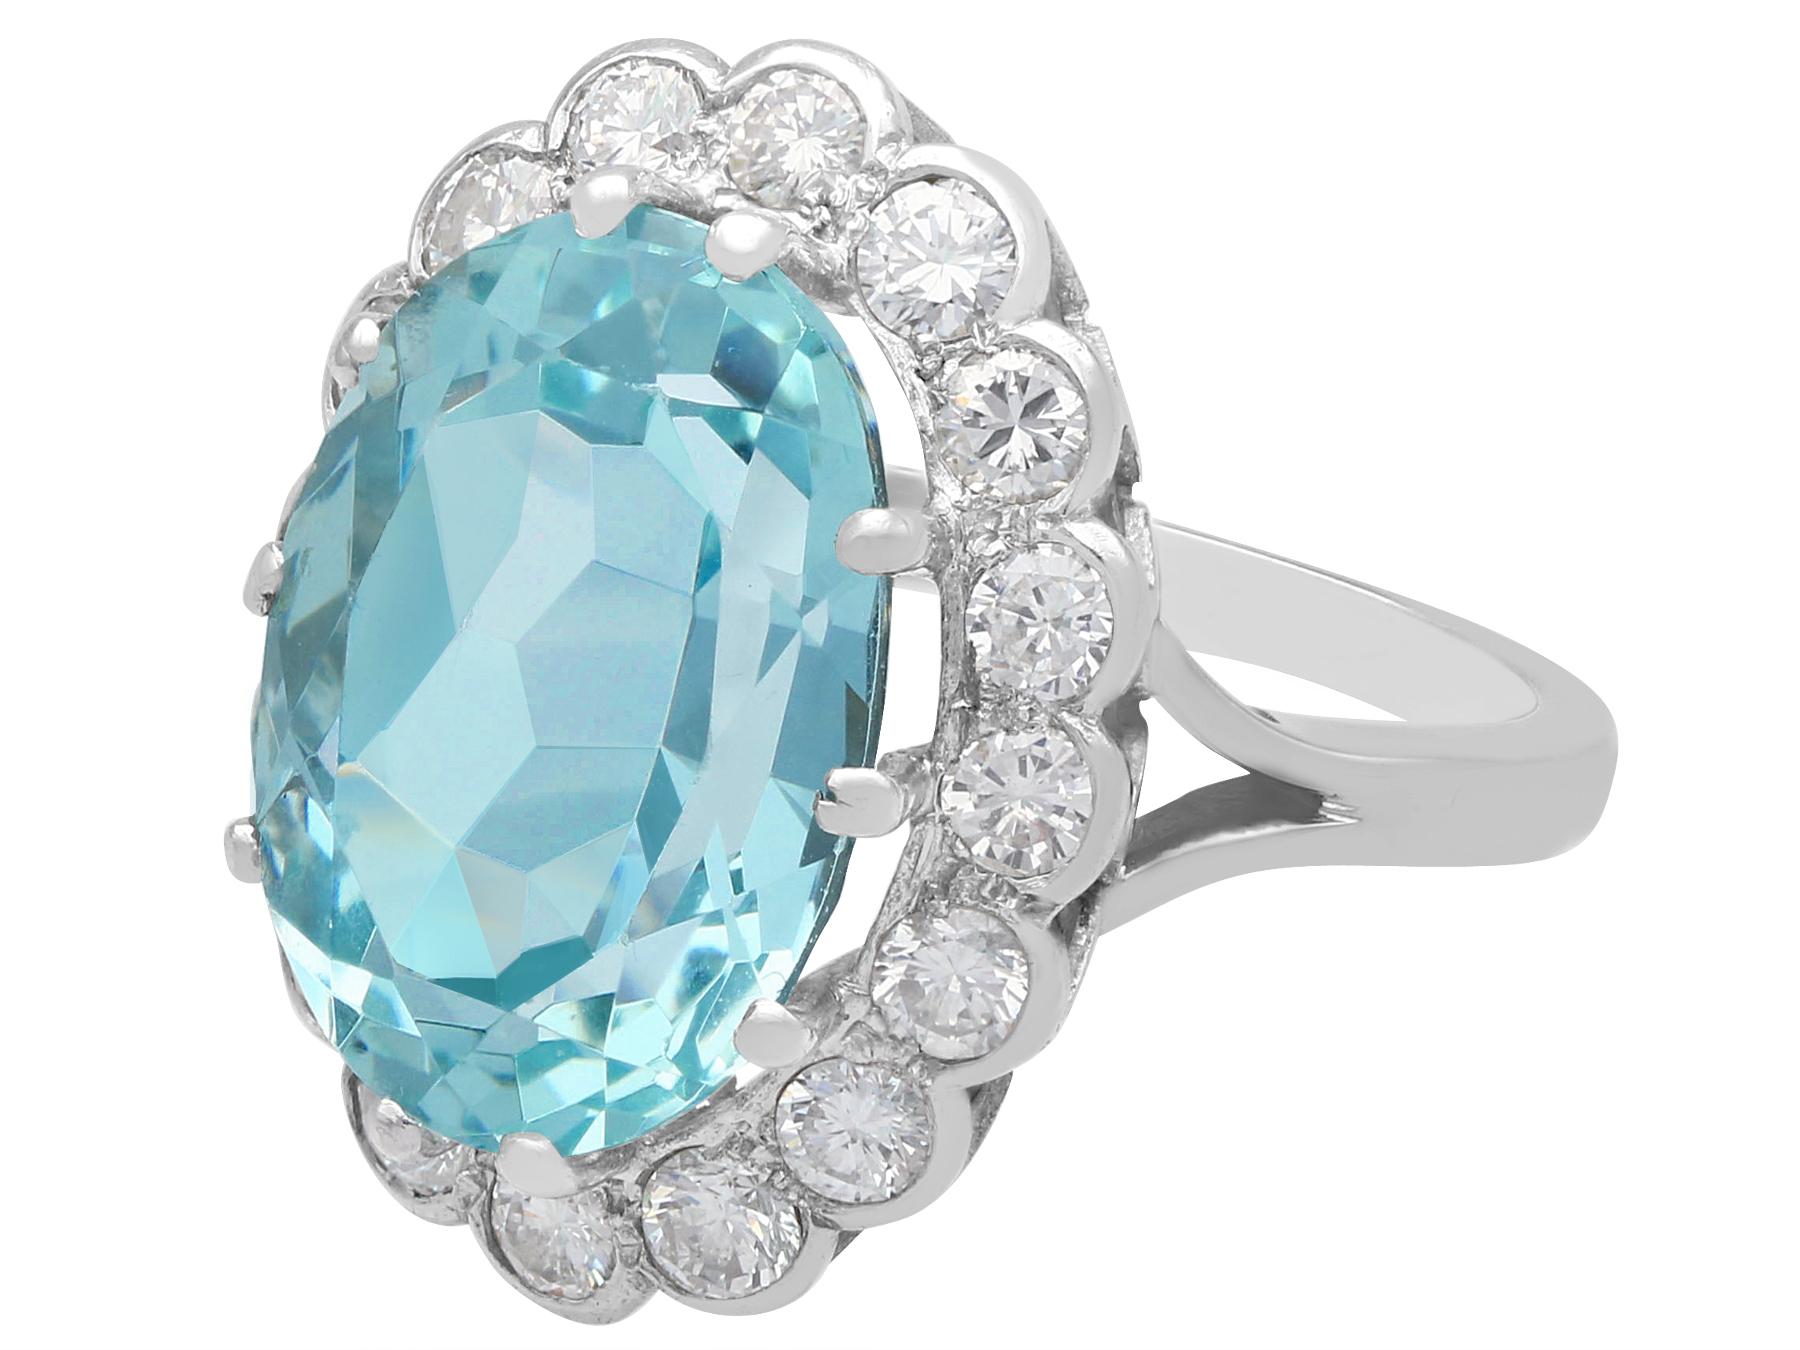 Oval Cut 7.65 Carat Aquamarine and 1.02 Carat Diamond White Gold Cocktail Ring For Sale